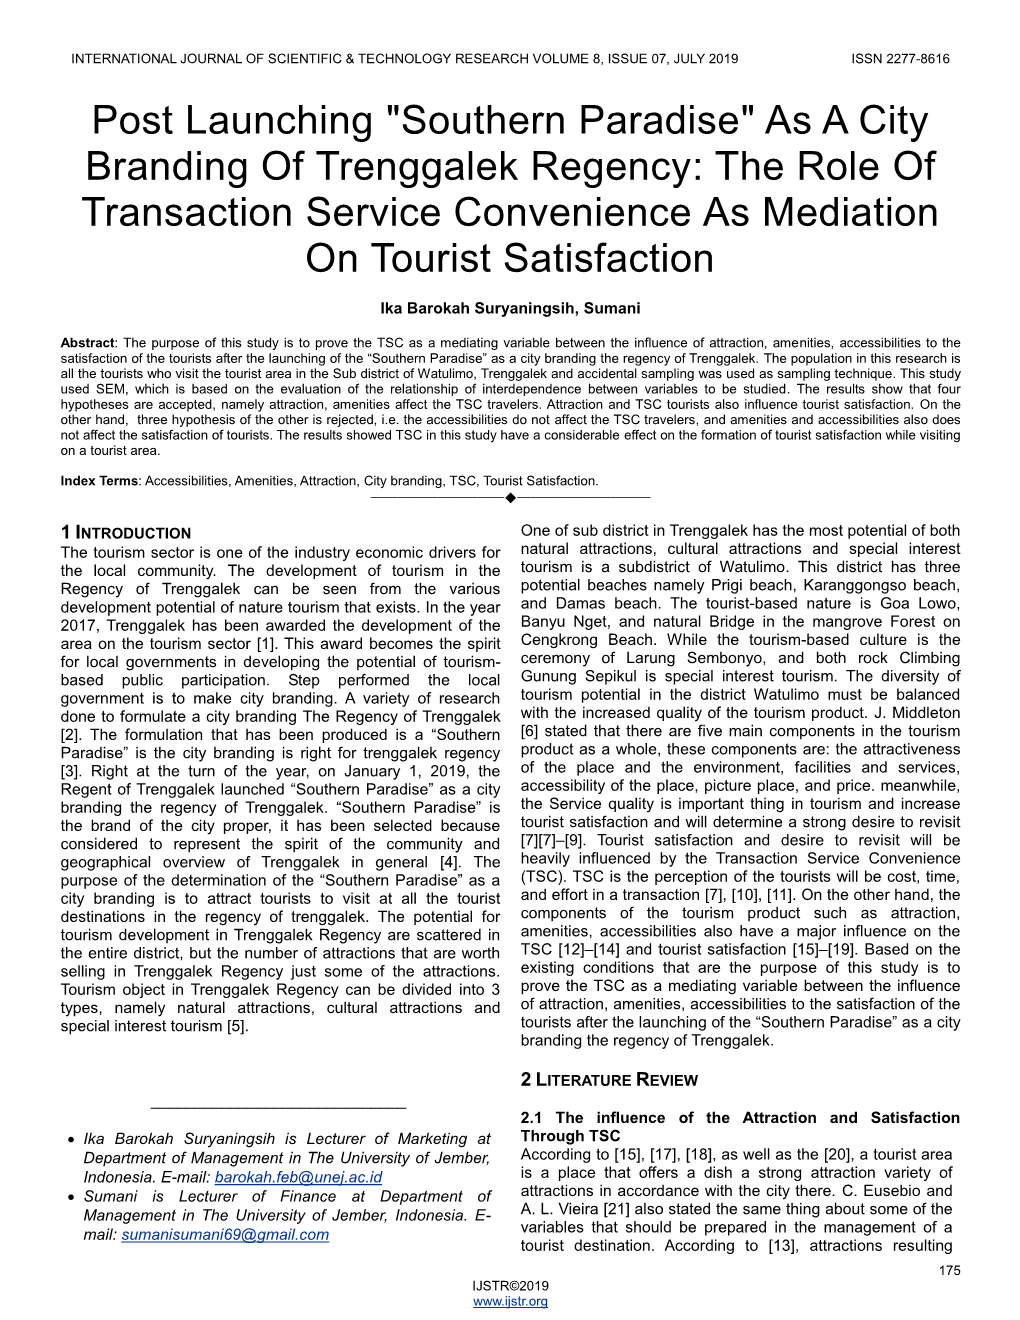 "Southern Paradise" As a City Branding of Trenggalek Regency: the Role of Transaction Service Convenience As Mediation on Tourist Satisfaction